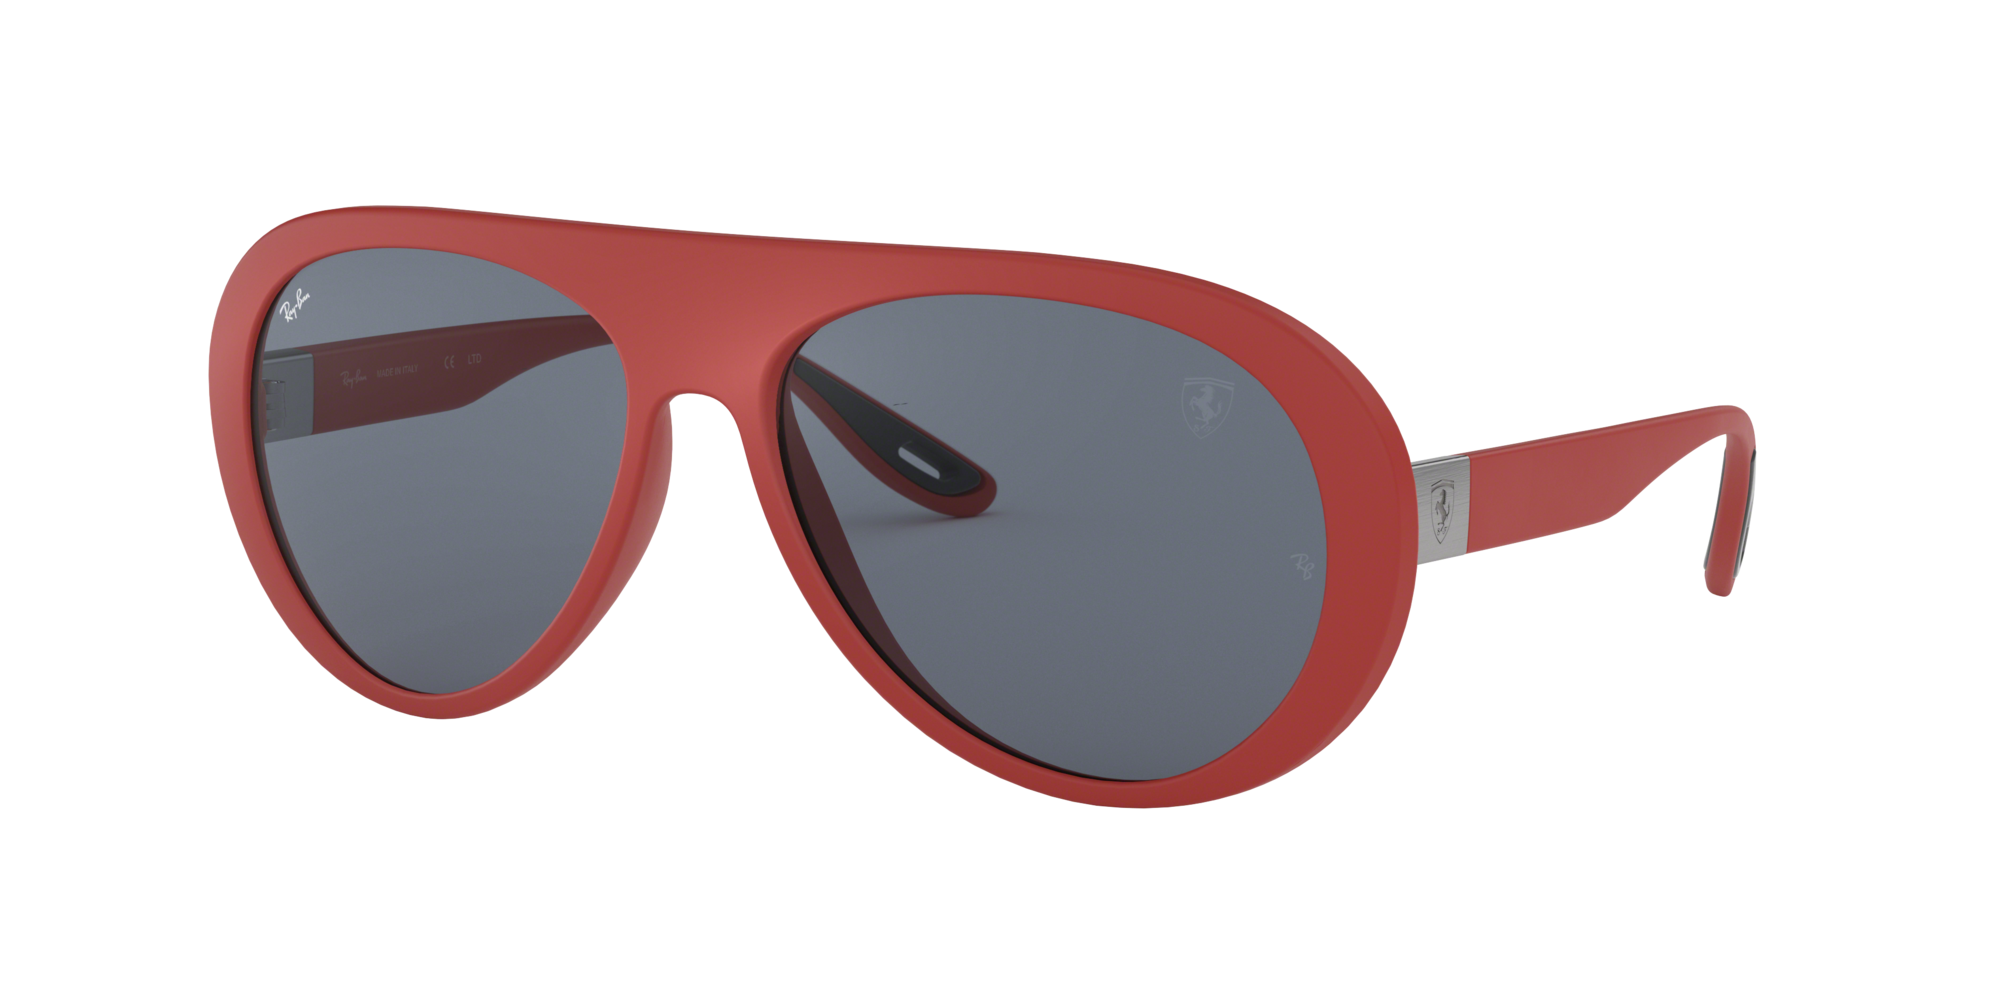 RayBan Man RB4310M SCUDERIA FERRARI COLLECTION  Frame color: Red, Lens color: Grey Classic, Size 5816/140